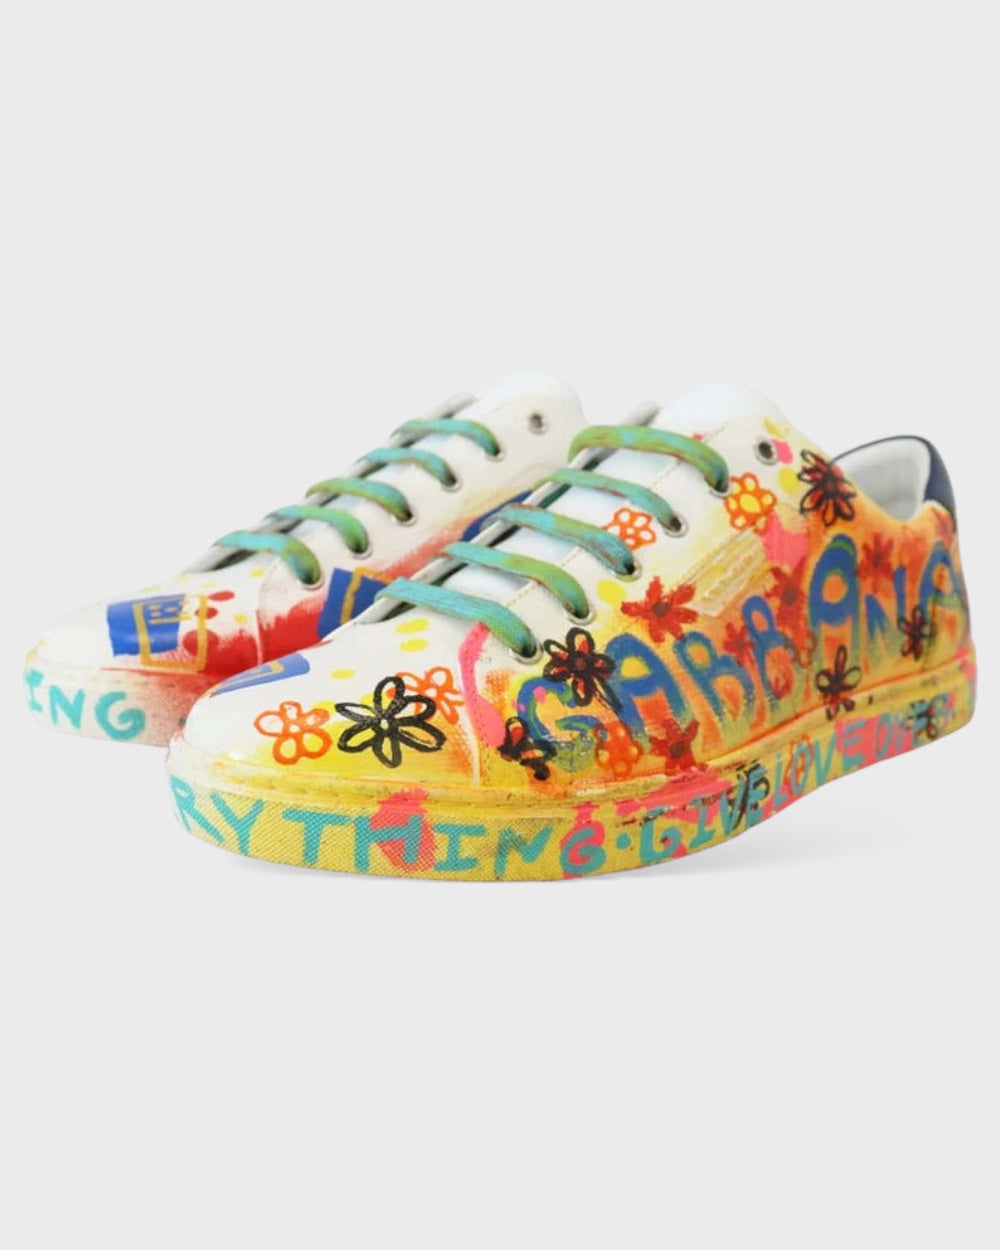 Dolce & Gabbana White Leather Sneakers Casual Handpainted Sneaker shoes